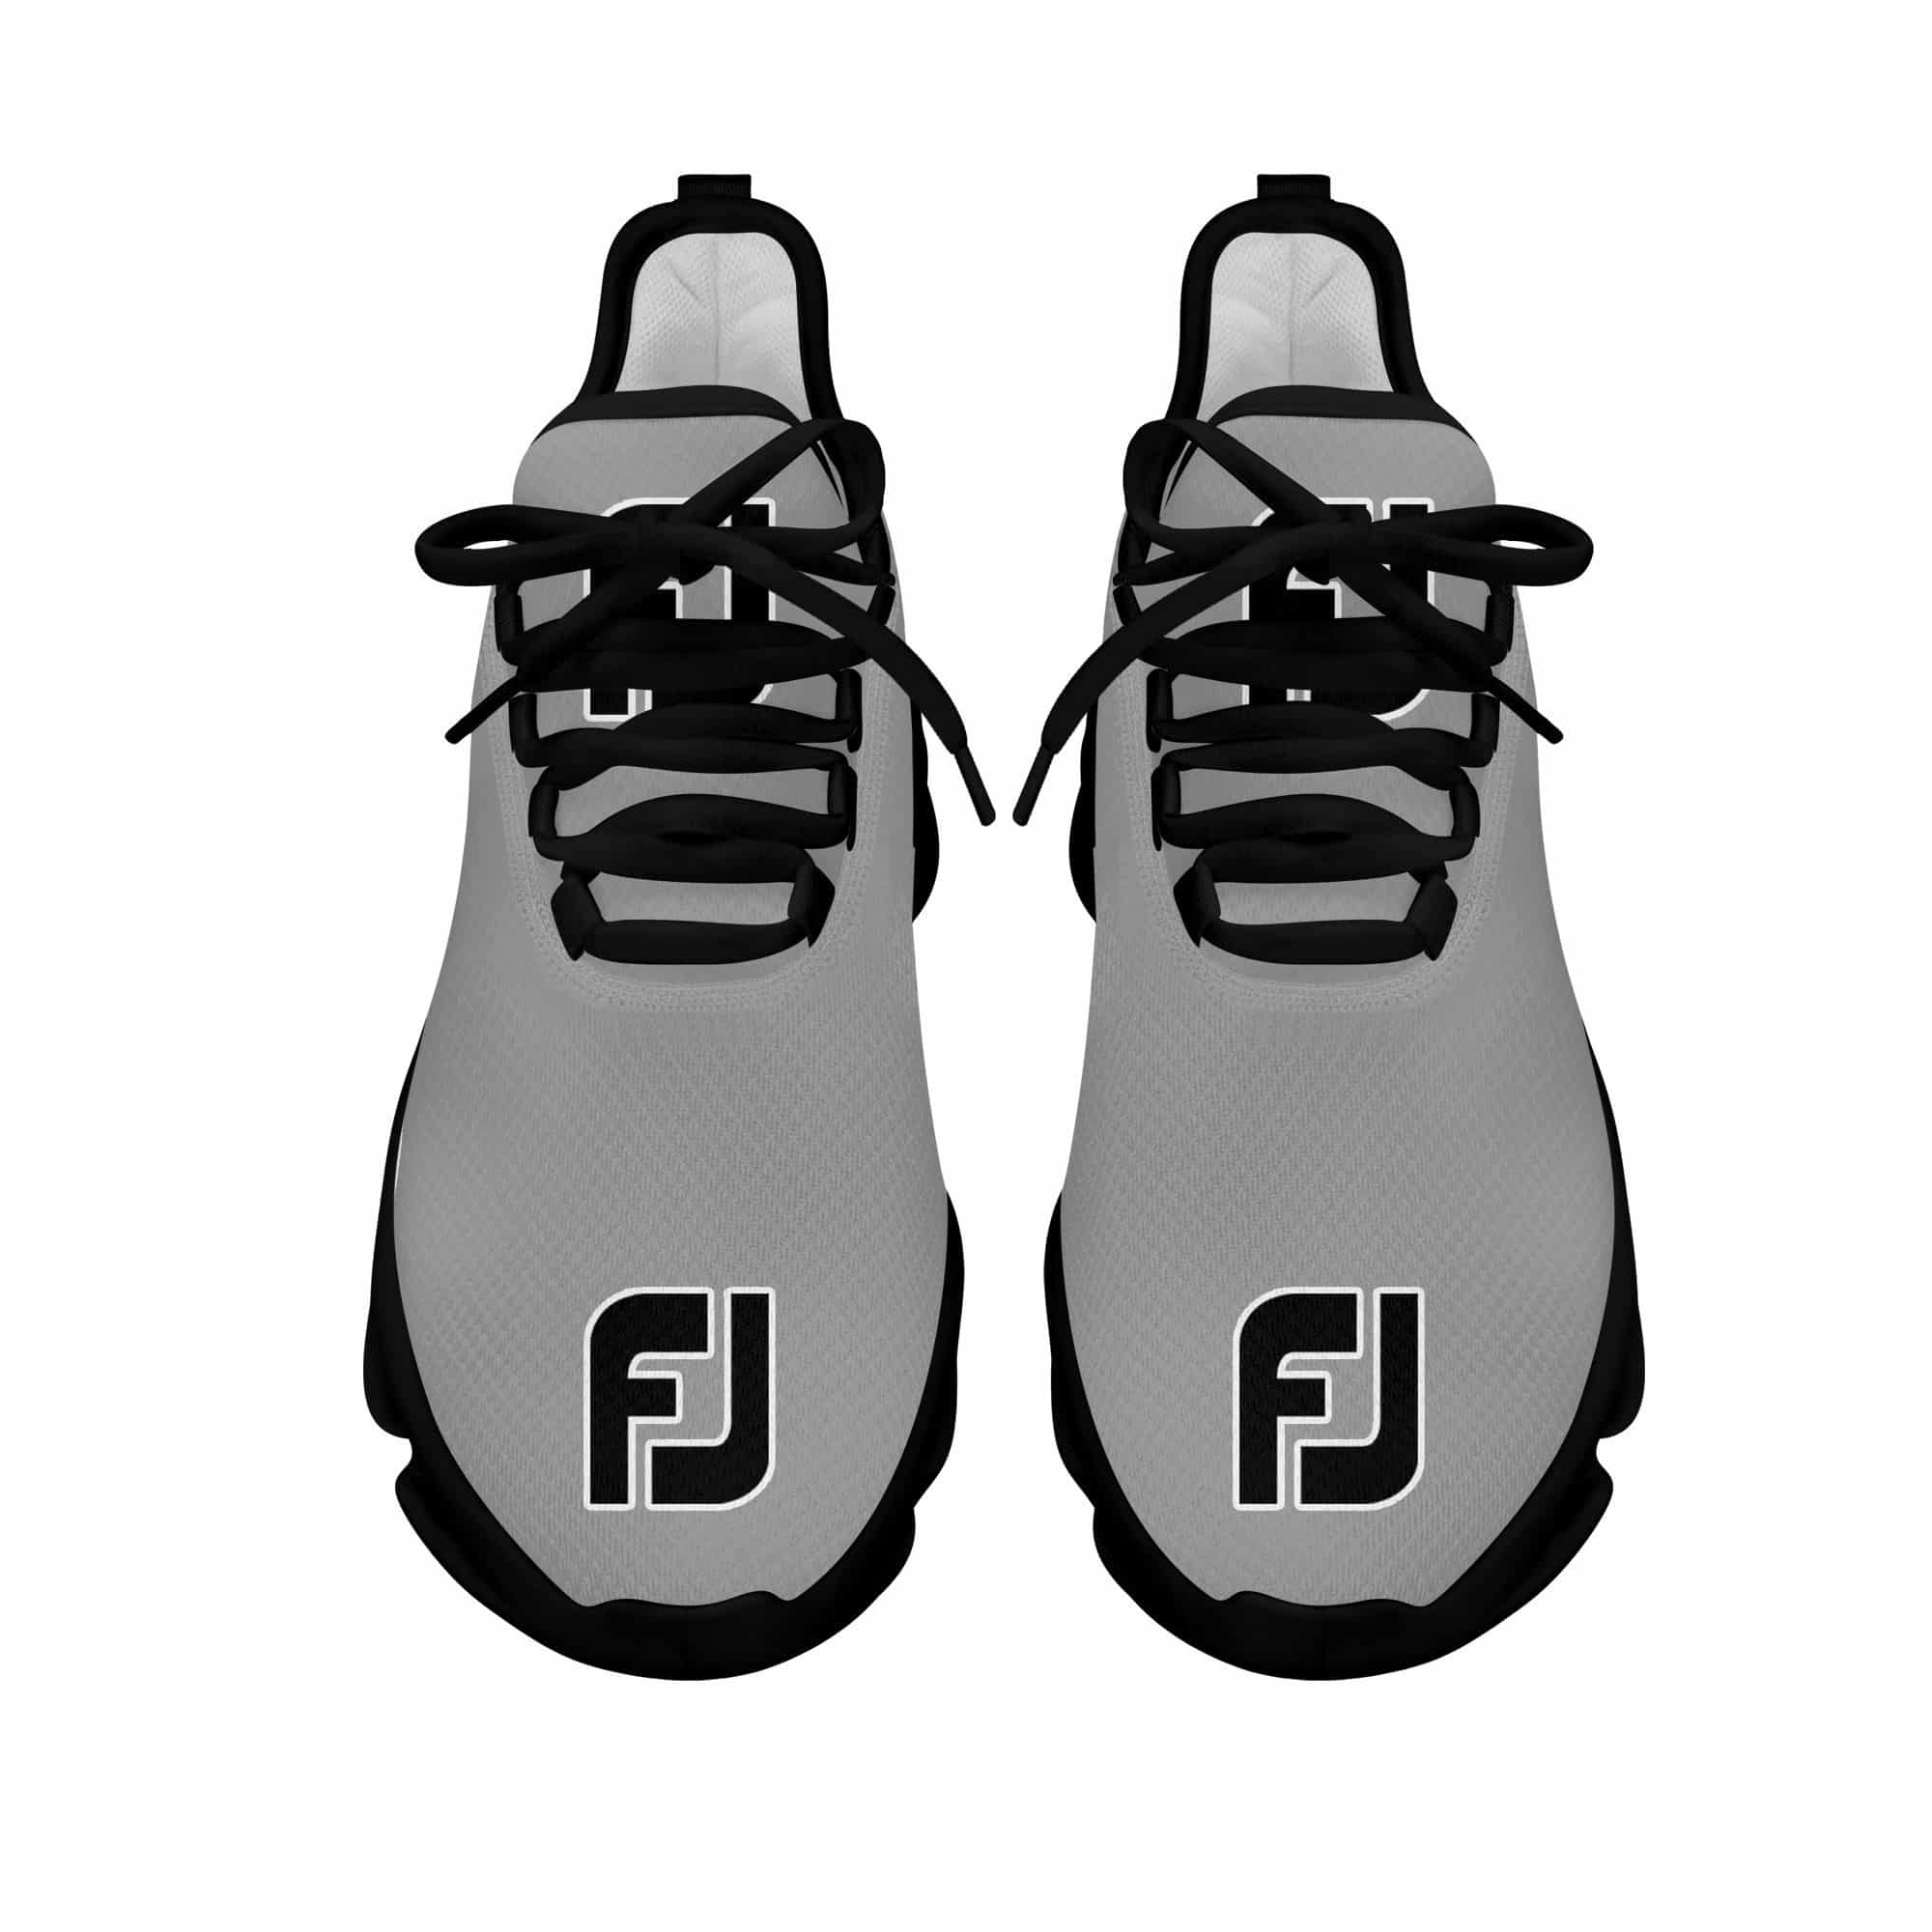 Fj Titleist Running Shoes Max Soul Shoes Sneakers Ver 6 3